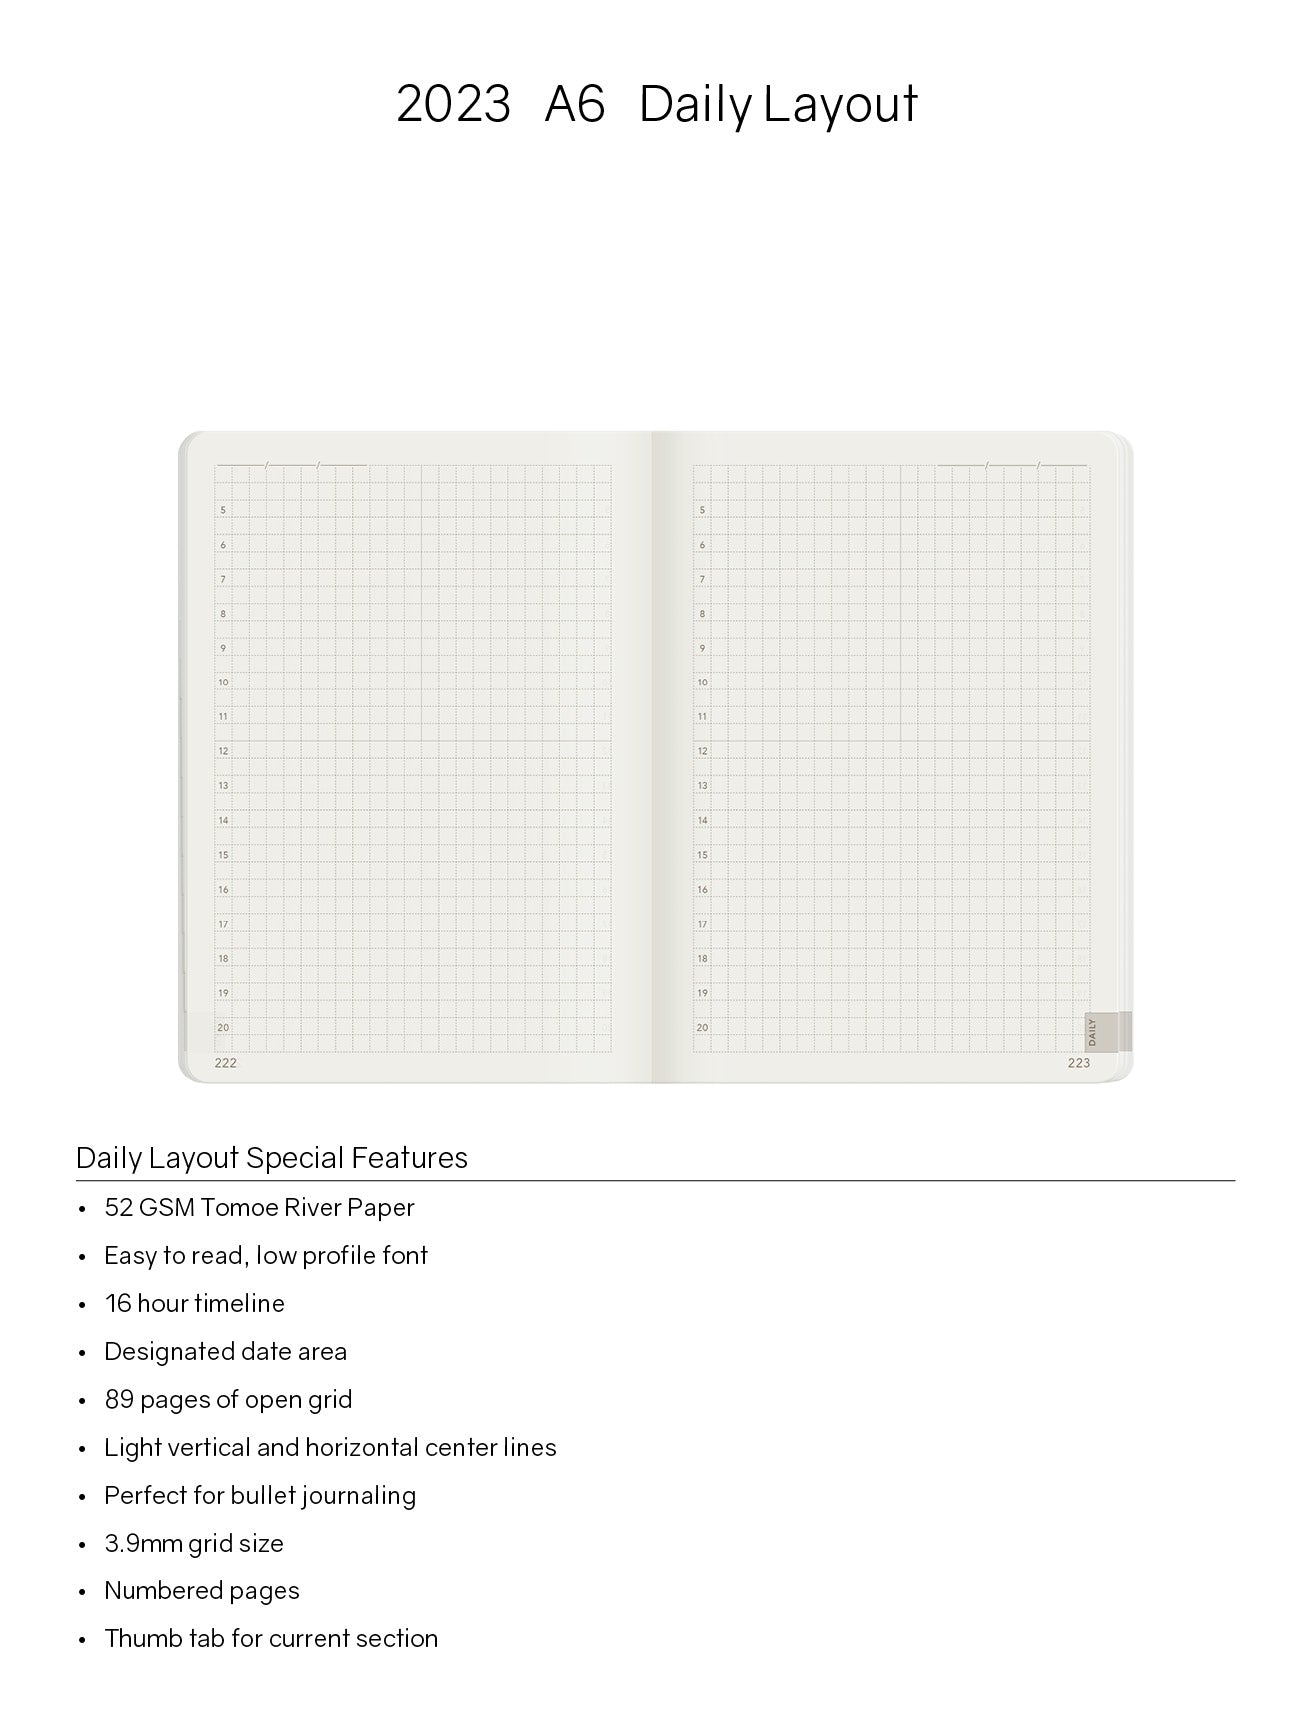 Sale | 2023 A6 Weekly Planner - 52gsm Tomoe River Paper